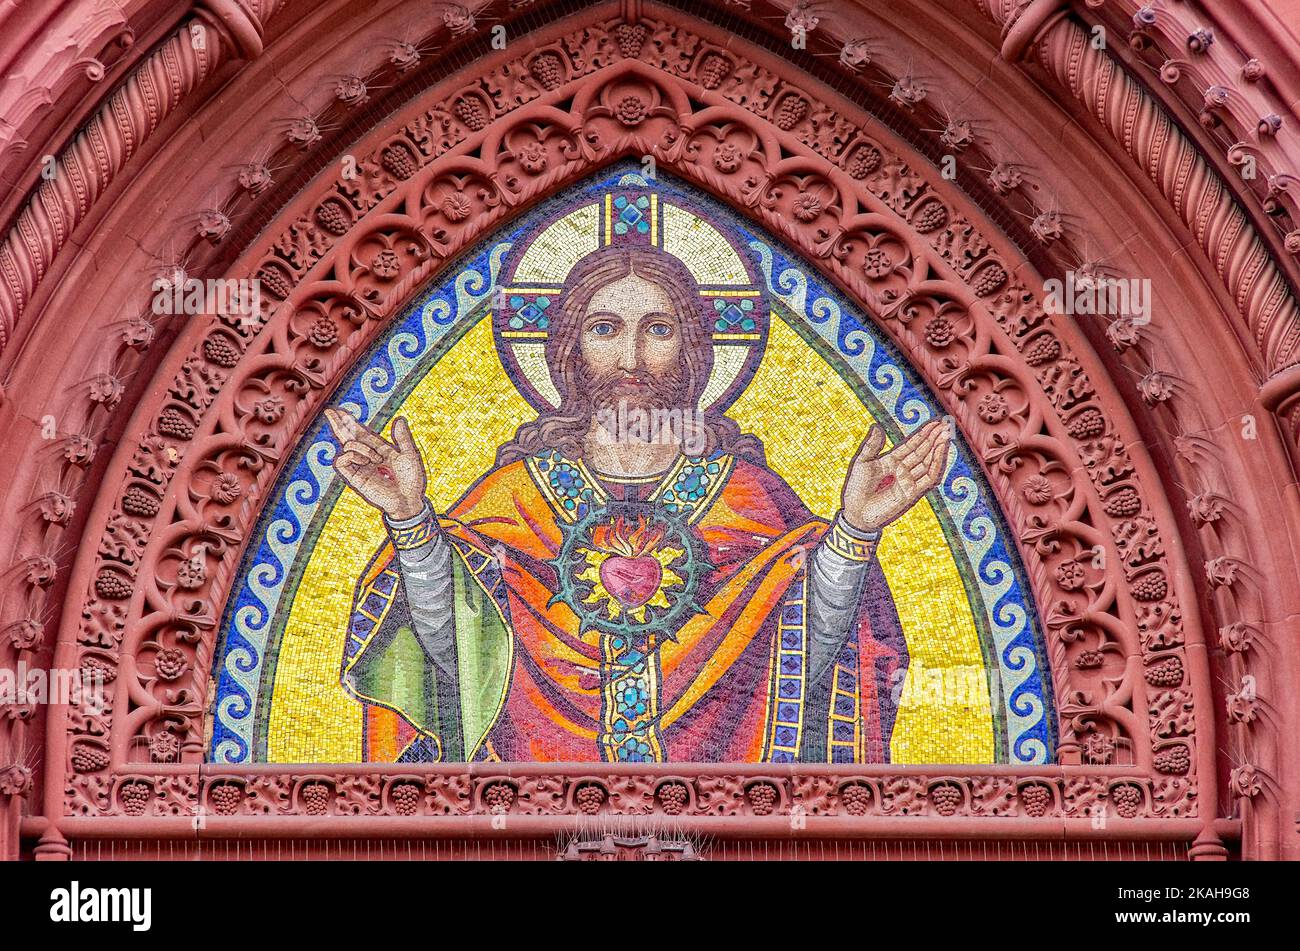 Mosaic depiction of Jesus Christ in the pointed arch of the main portal of the Church of the Sacred Heart in Freiburg im Breisgau, Germany. Stock Photo